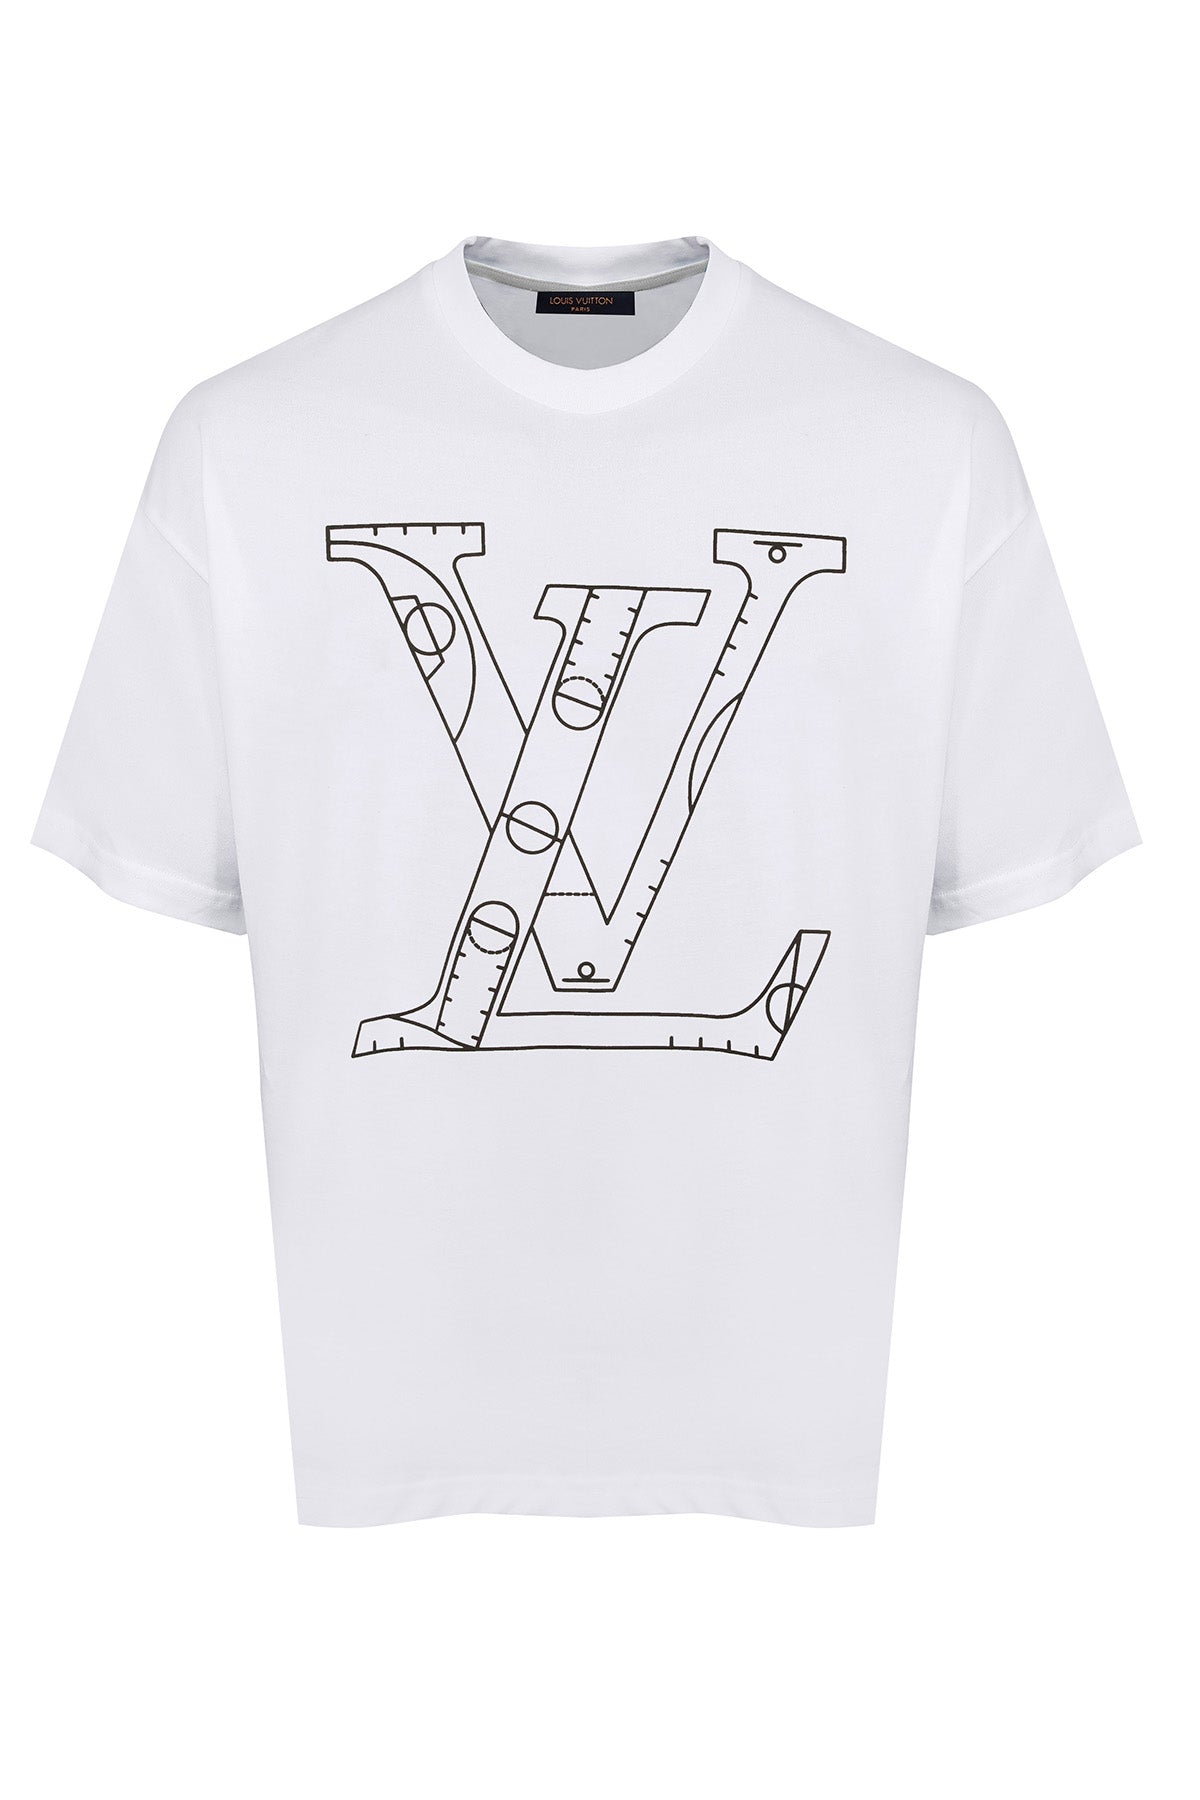 LV x NBA FRONT-AND-BACK LETTERS PRINT T-SHIRT